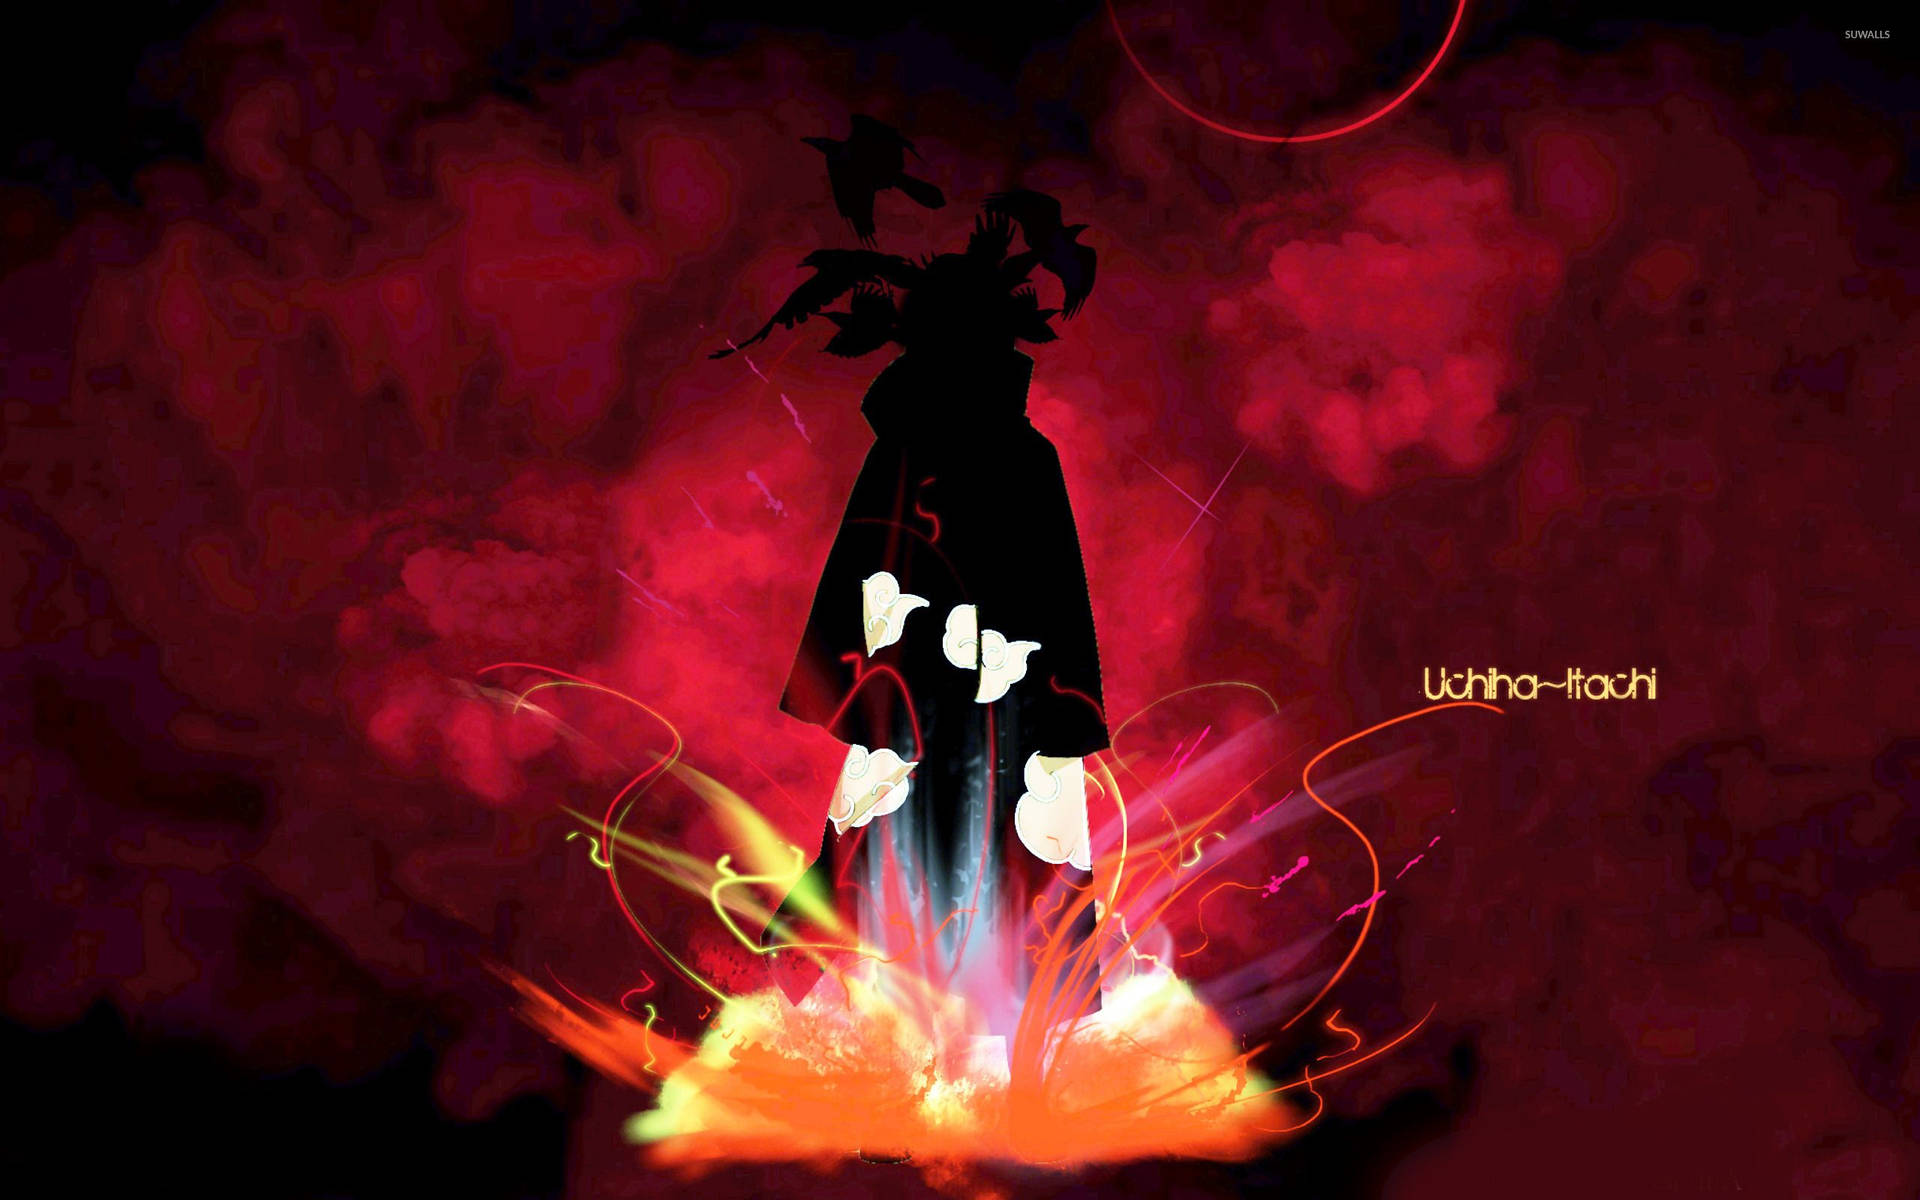 Itachi Uchiha casting a powerful legacy into the evening sky Wallpaper